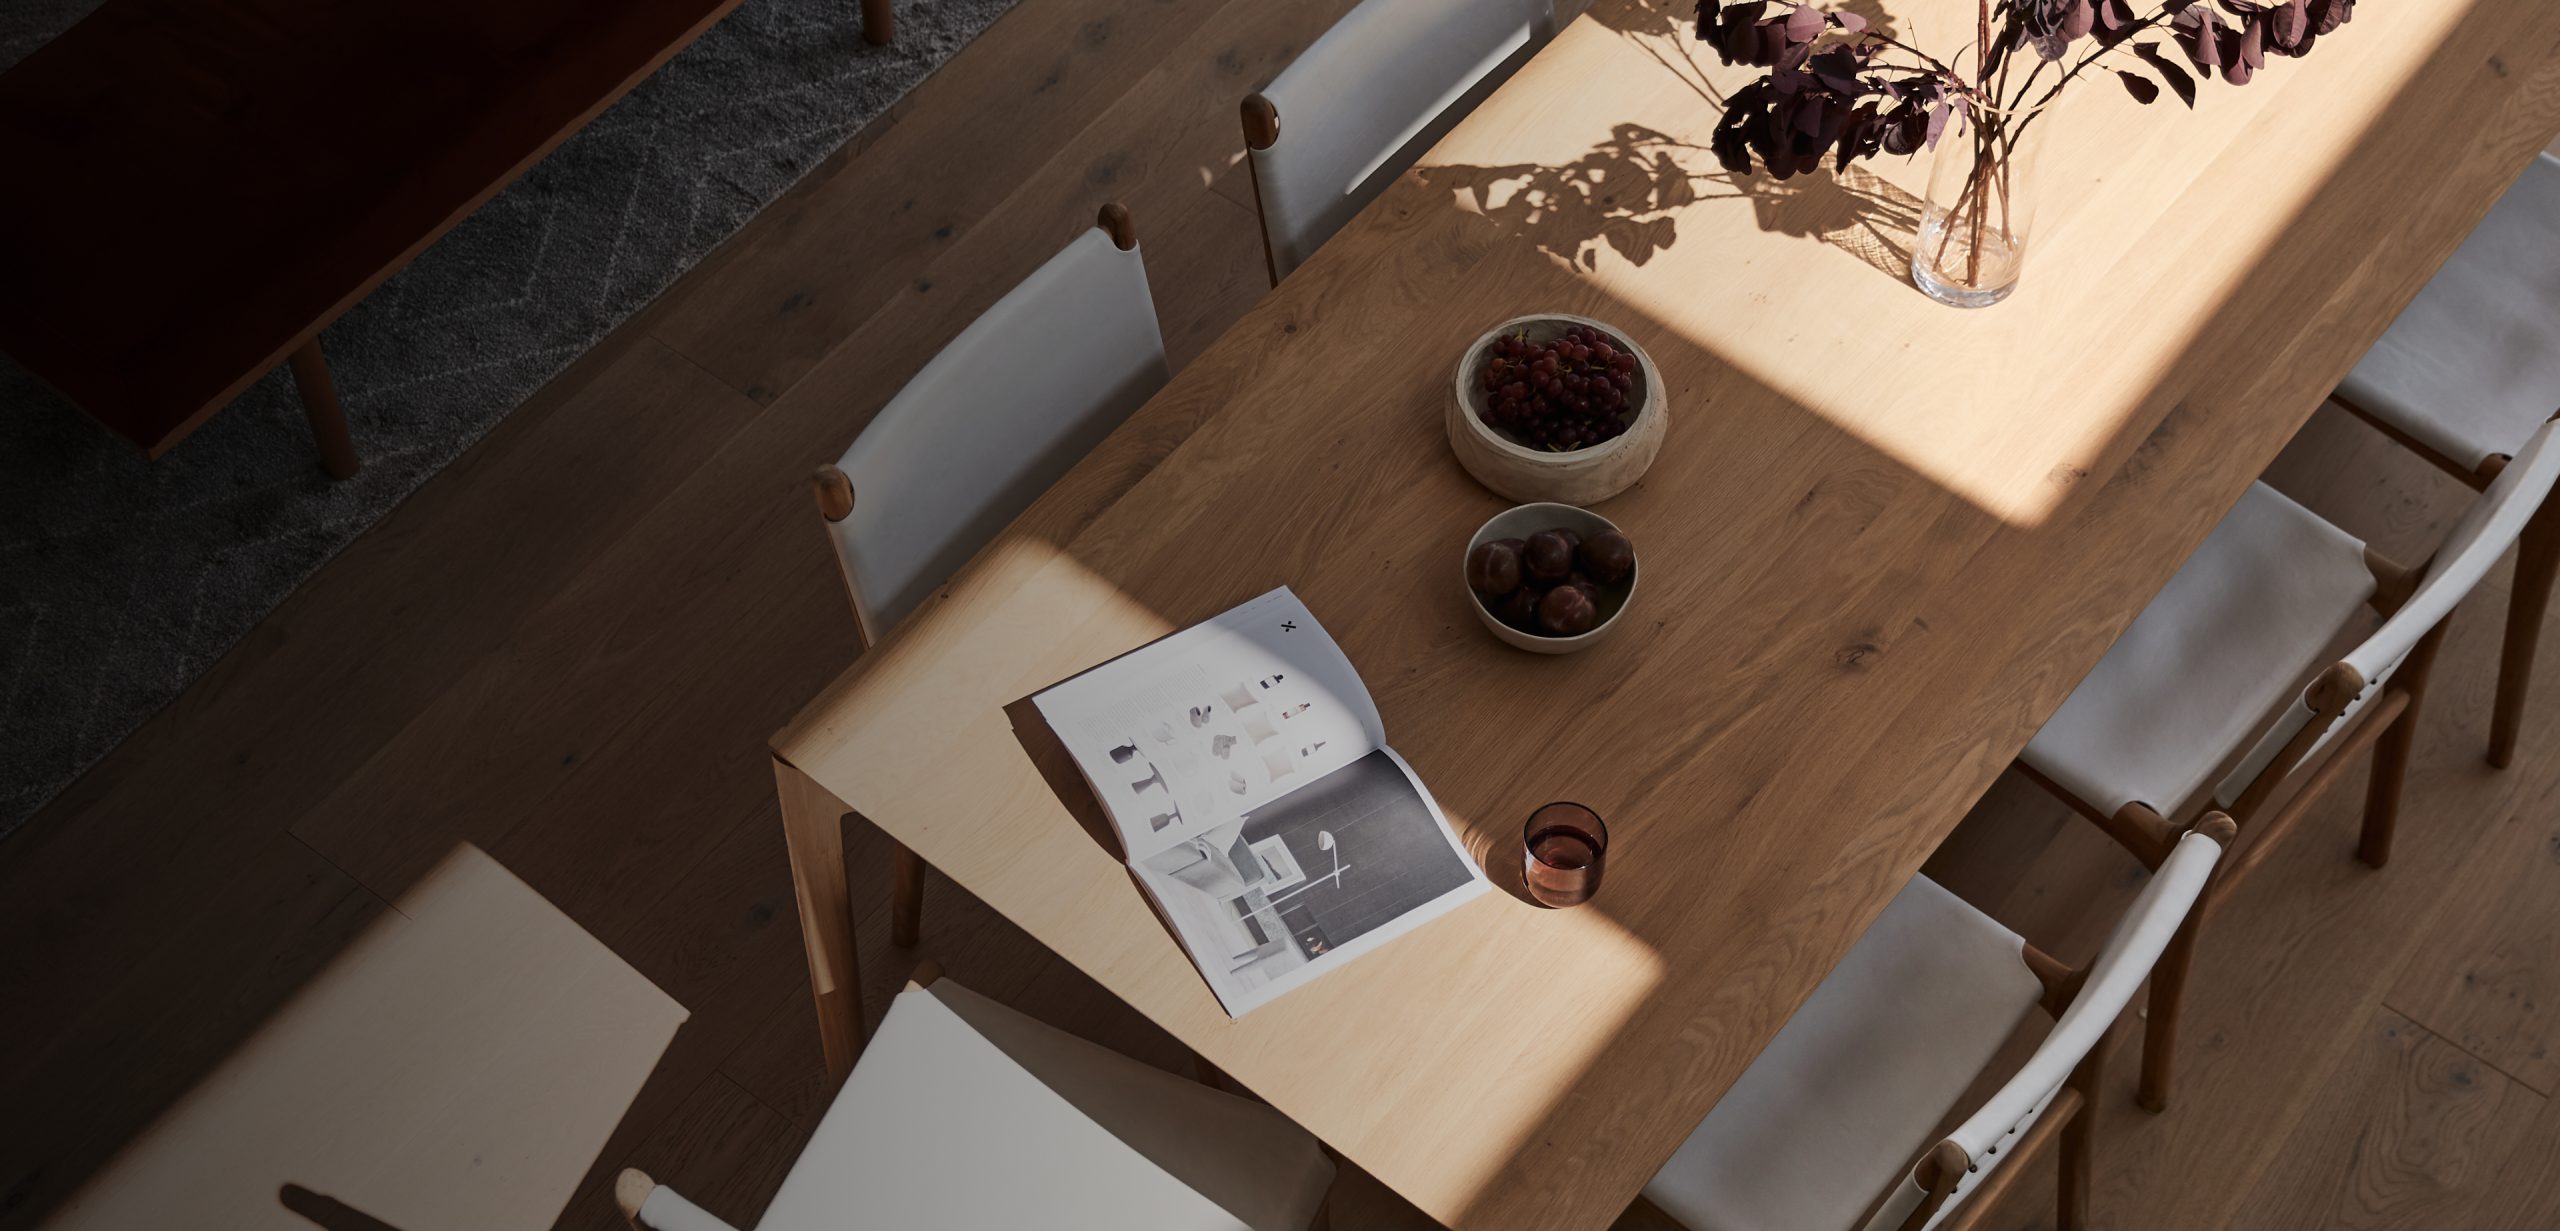 Dining setting with an interior design catalogue open on the table